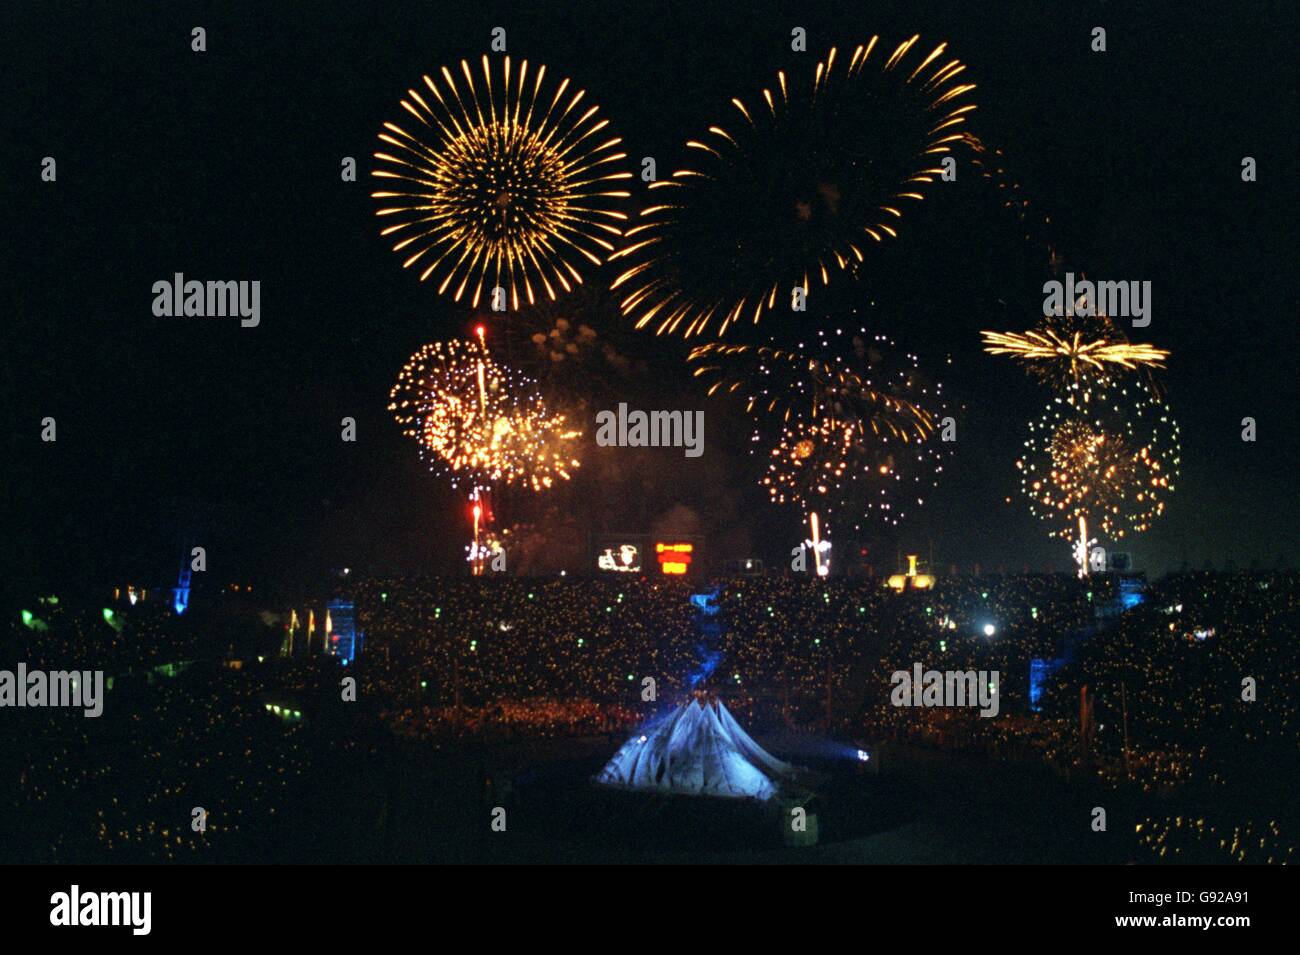 Fireworks explode in the night sky as the Winter Olympic Games draw to a close Stock Photo